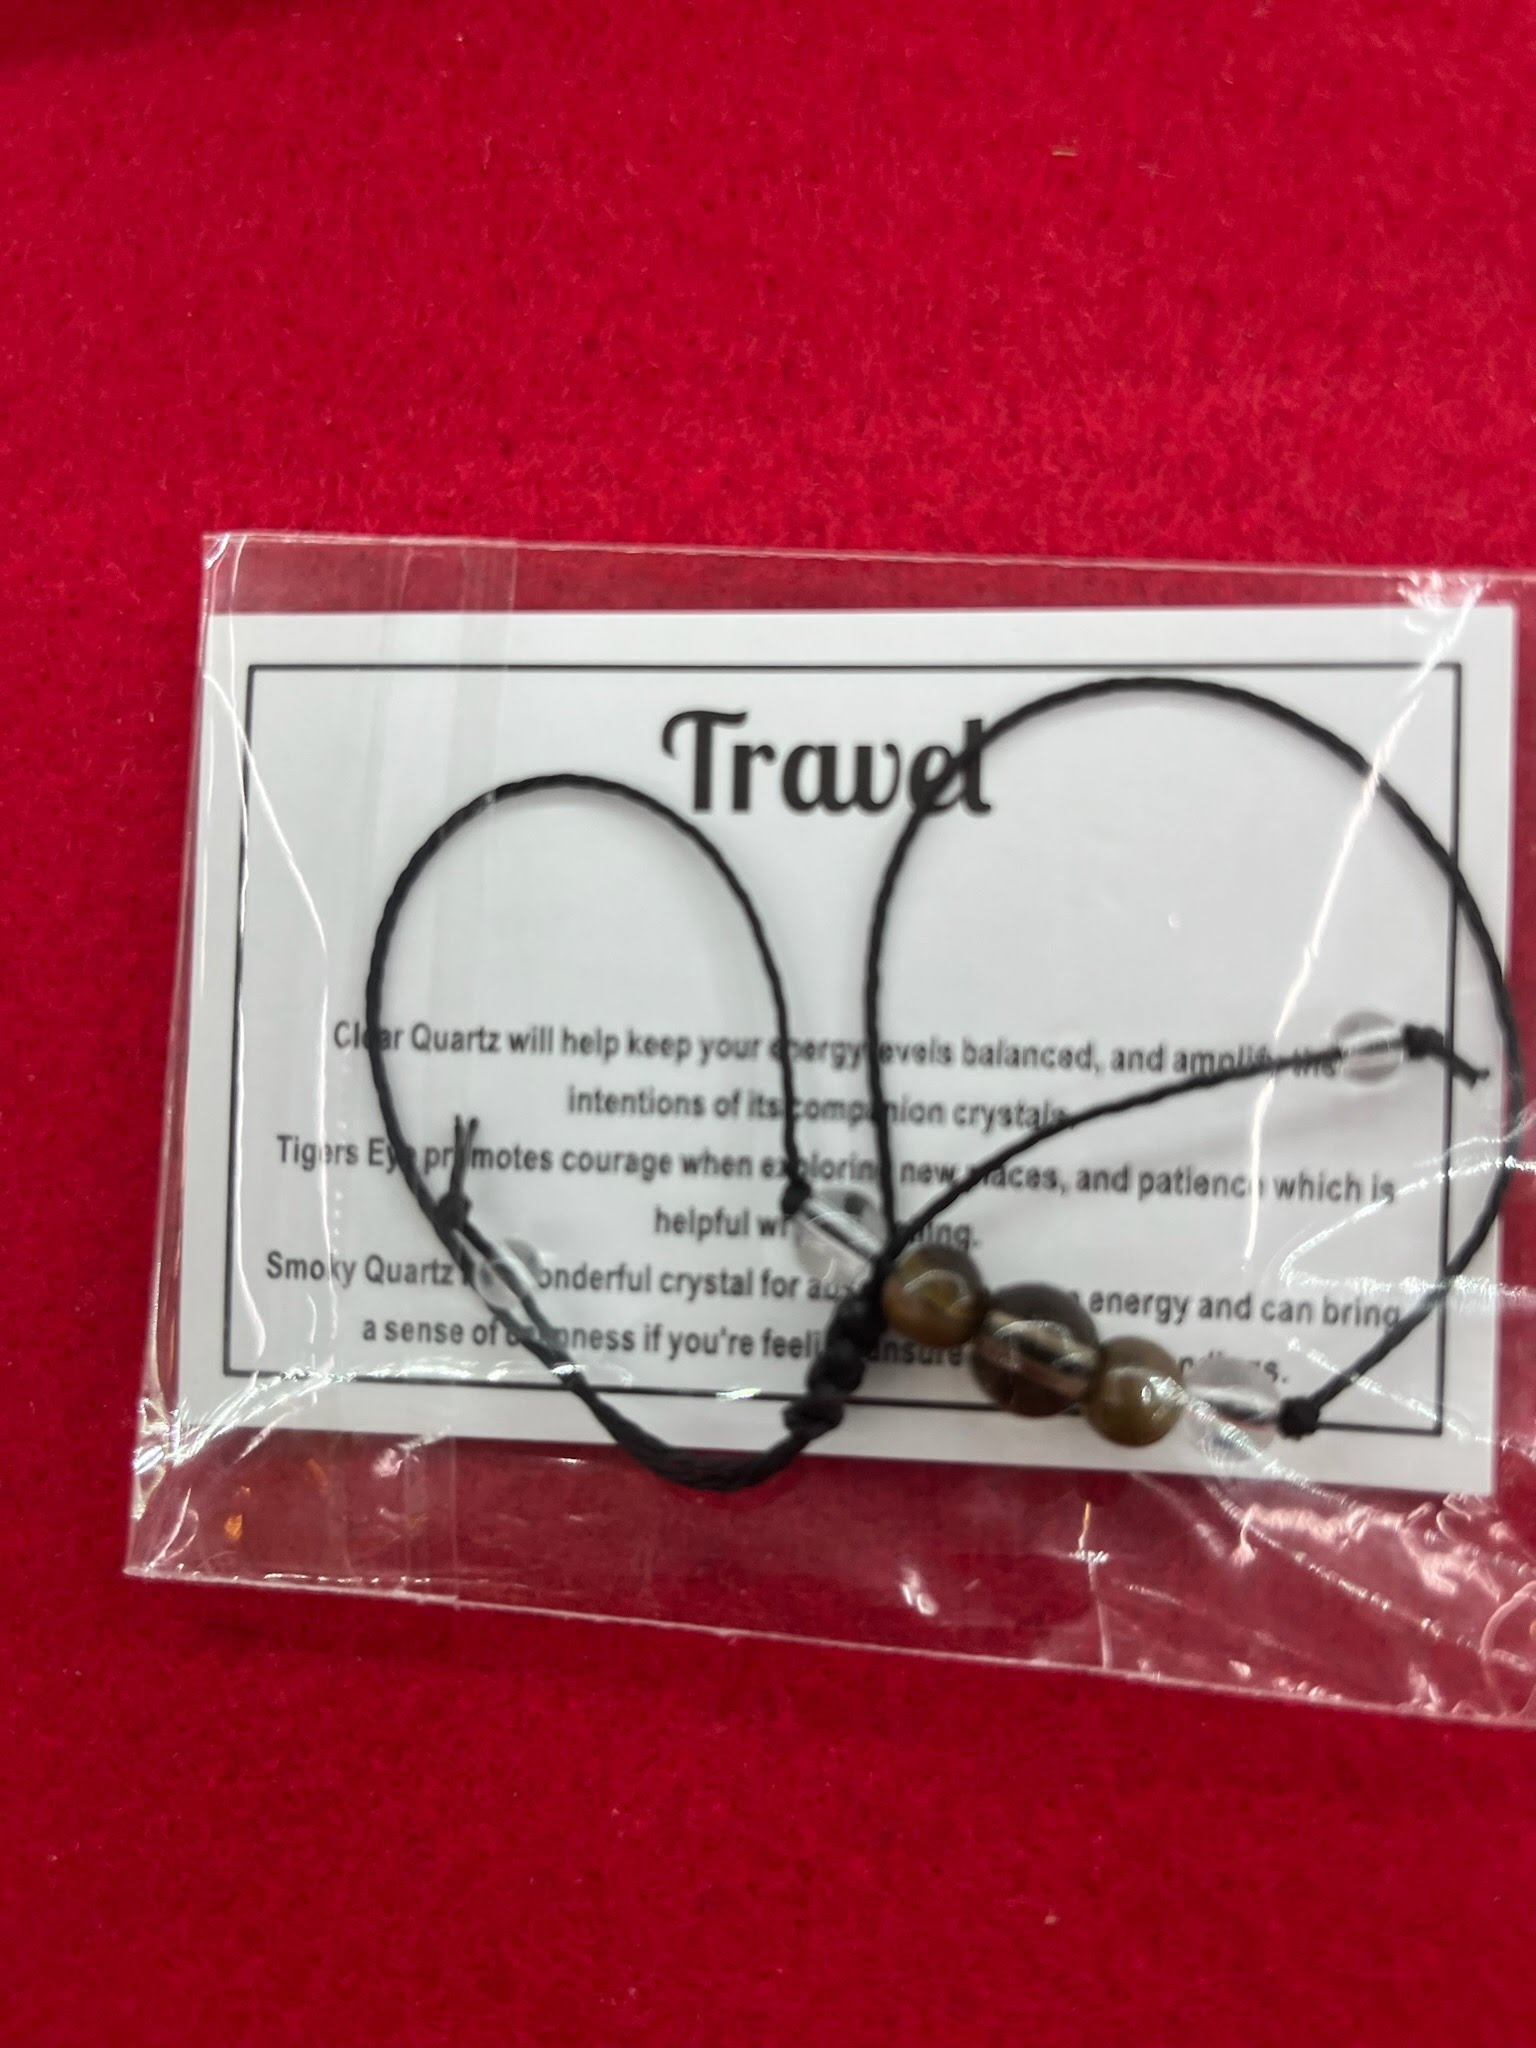 A bag of travel jewelry is shown on the table.